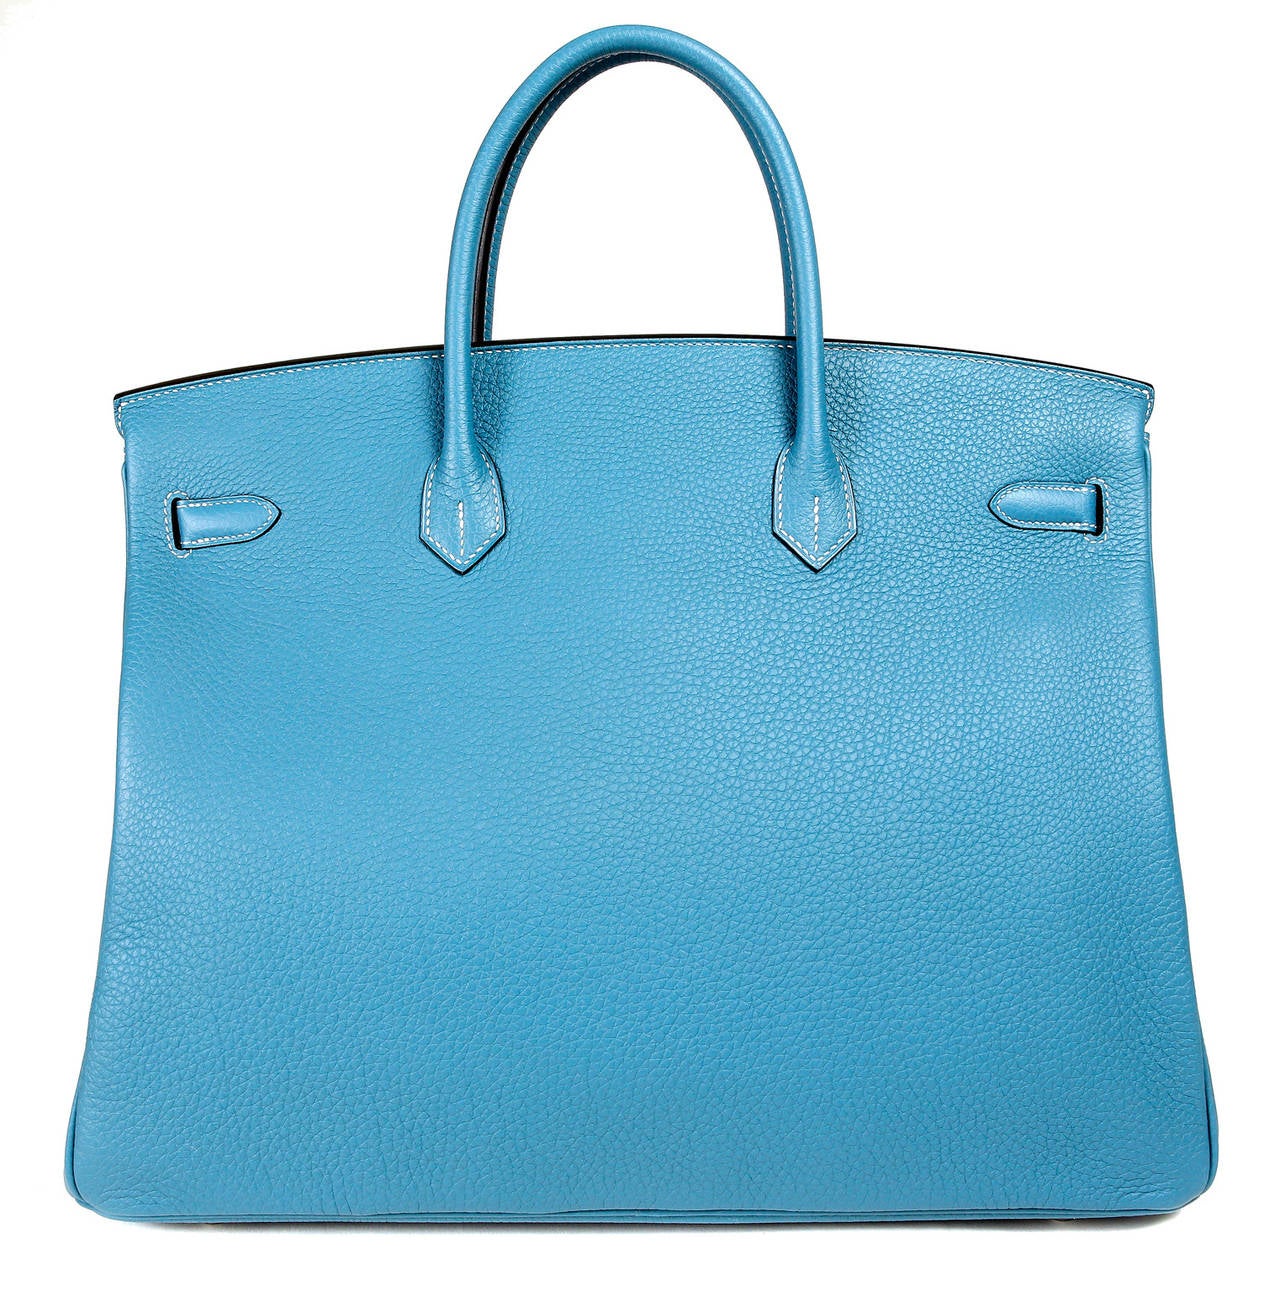 Hermès Blue Jean Togo 40 cm Birkin - PRISTINE unworn condition with the plastic still attached to the hardware.   

Hermès bags are considered the ultimate luxury item the world over.  Hand stitched by skilled craftsmen, wait lists of a year or